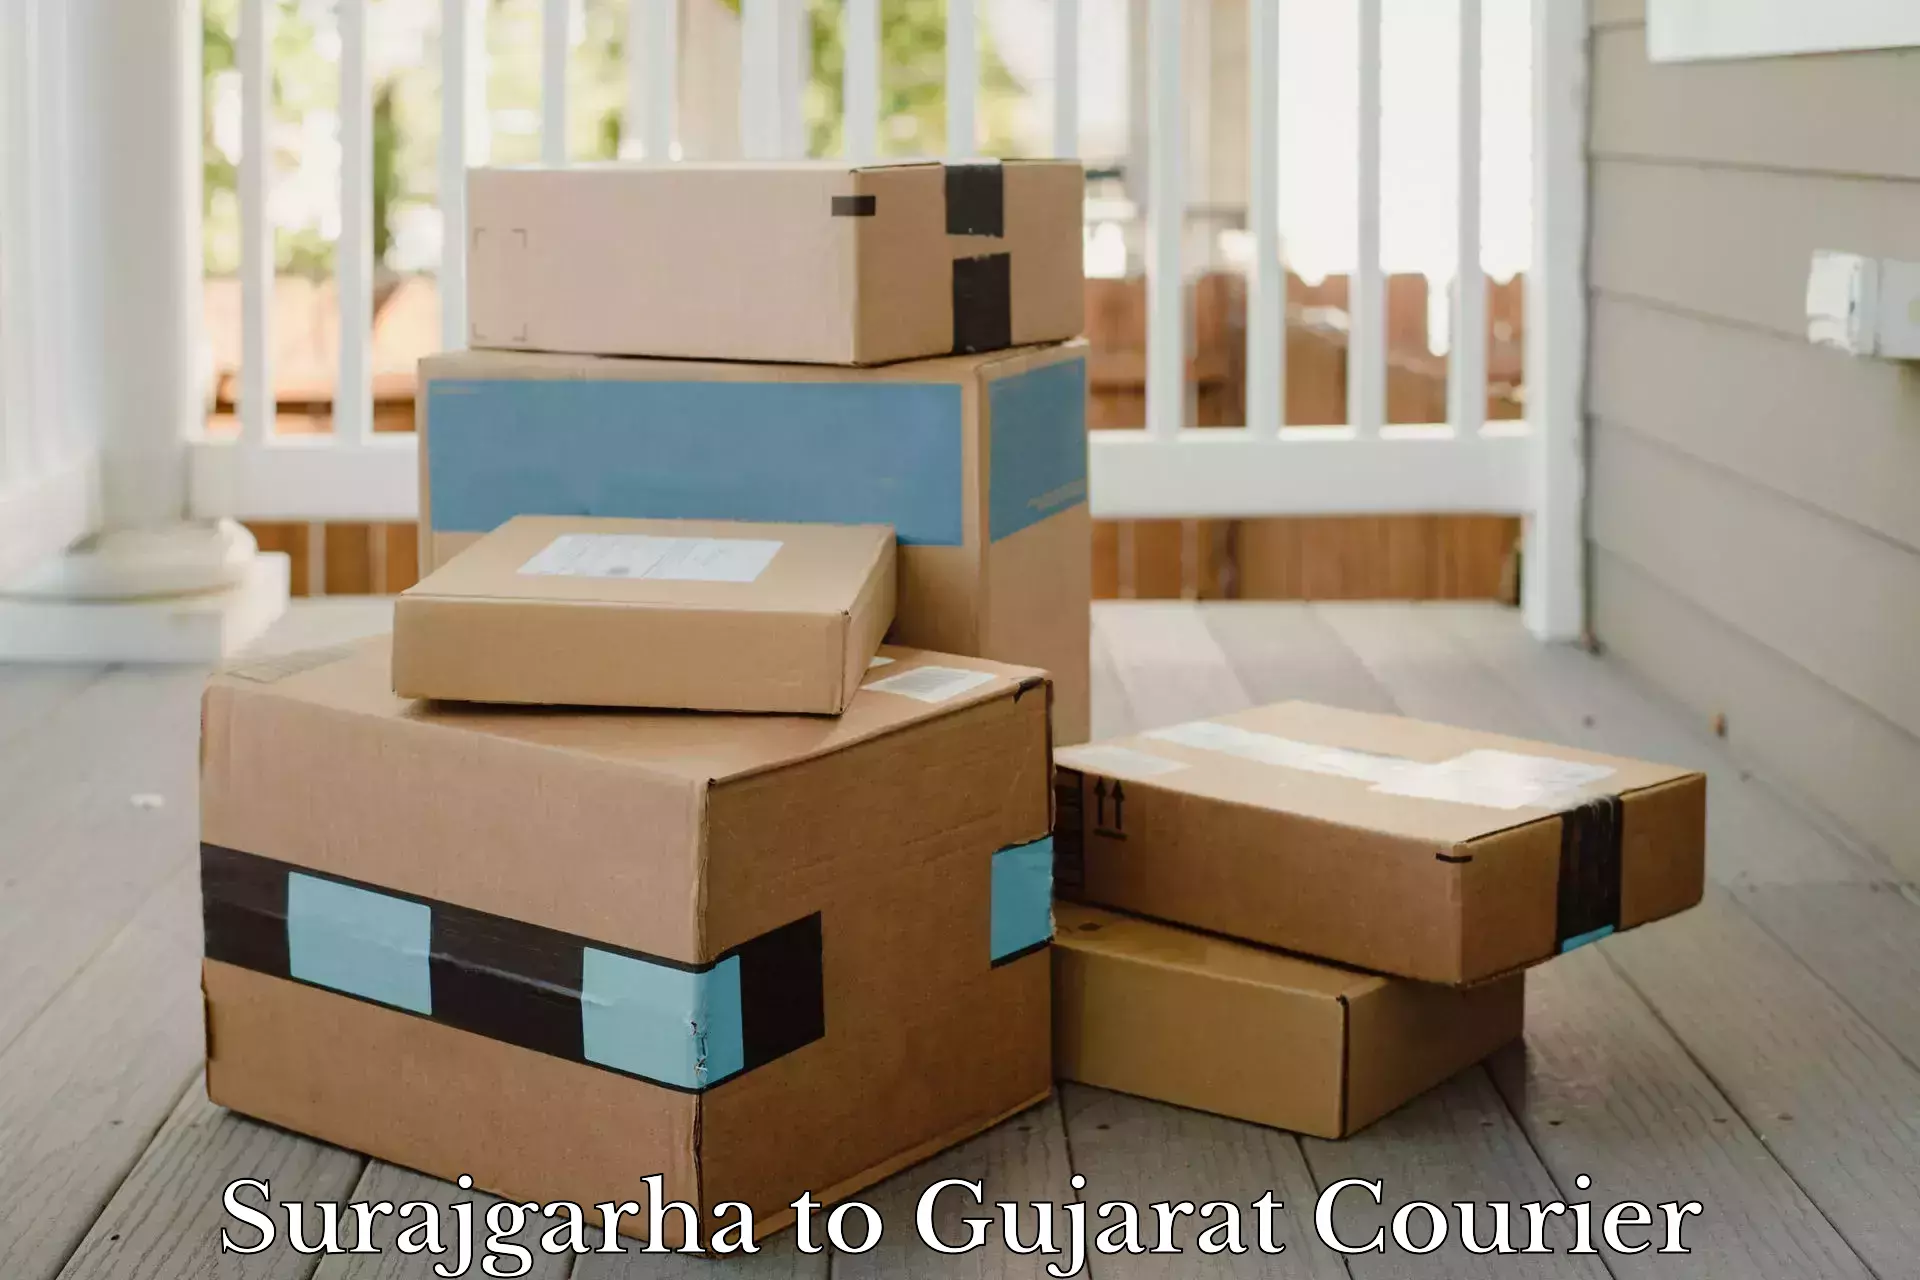 Package delivery network Surajgarha to Fateganj